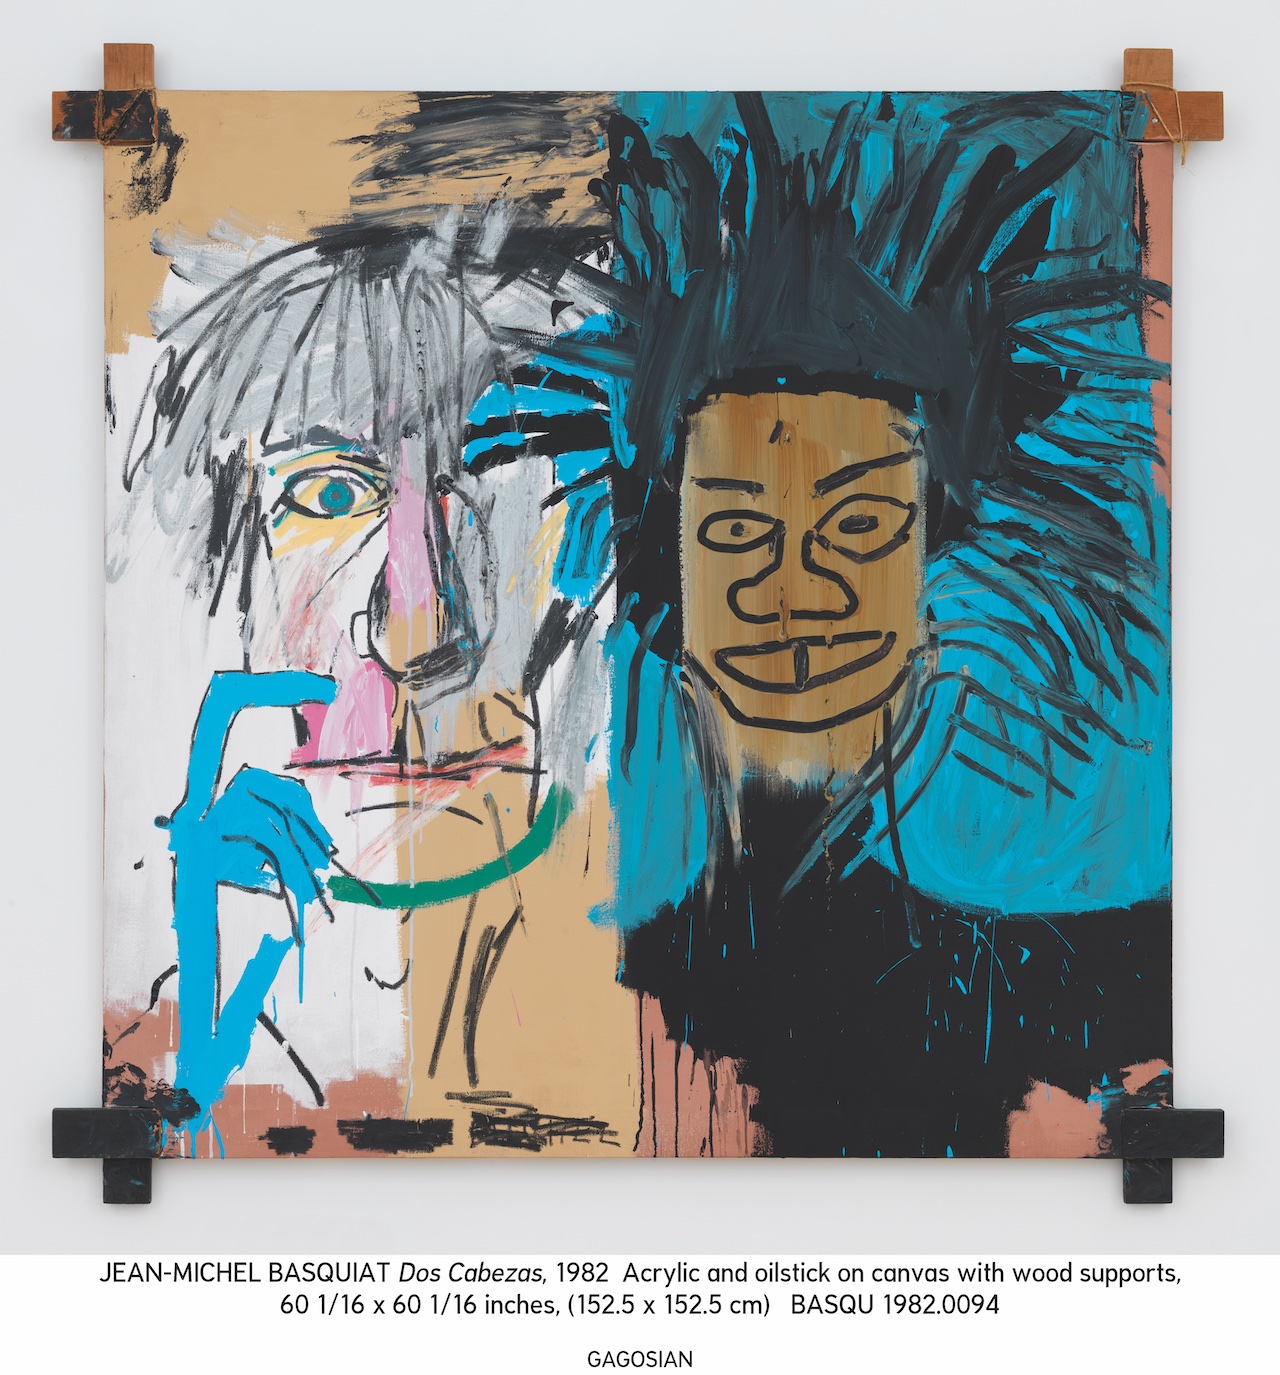 How Jean-Michel Basquiat Came Up With His Fascinating Public Persona